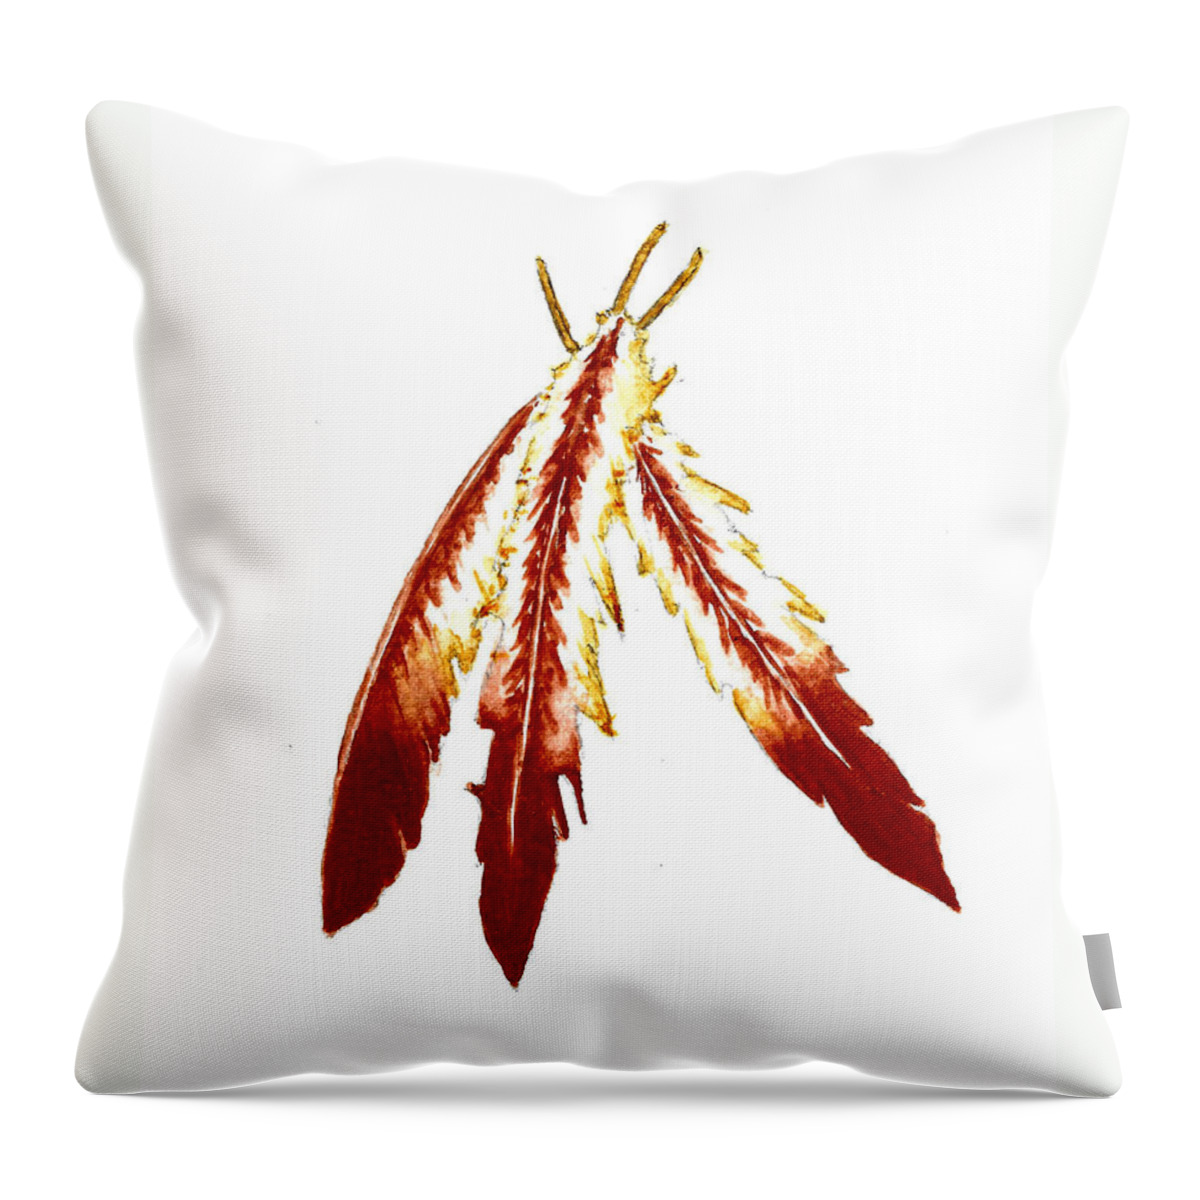 Ative American Throw Pillow featuring the painting Native American Feathers by Michael Vigliotti